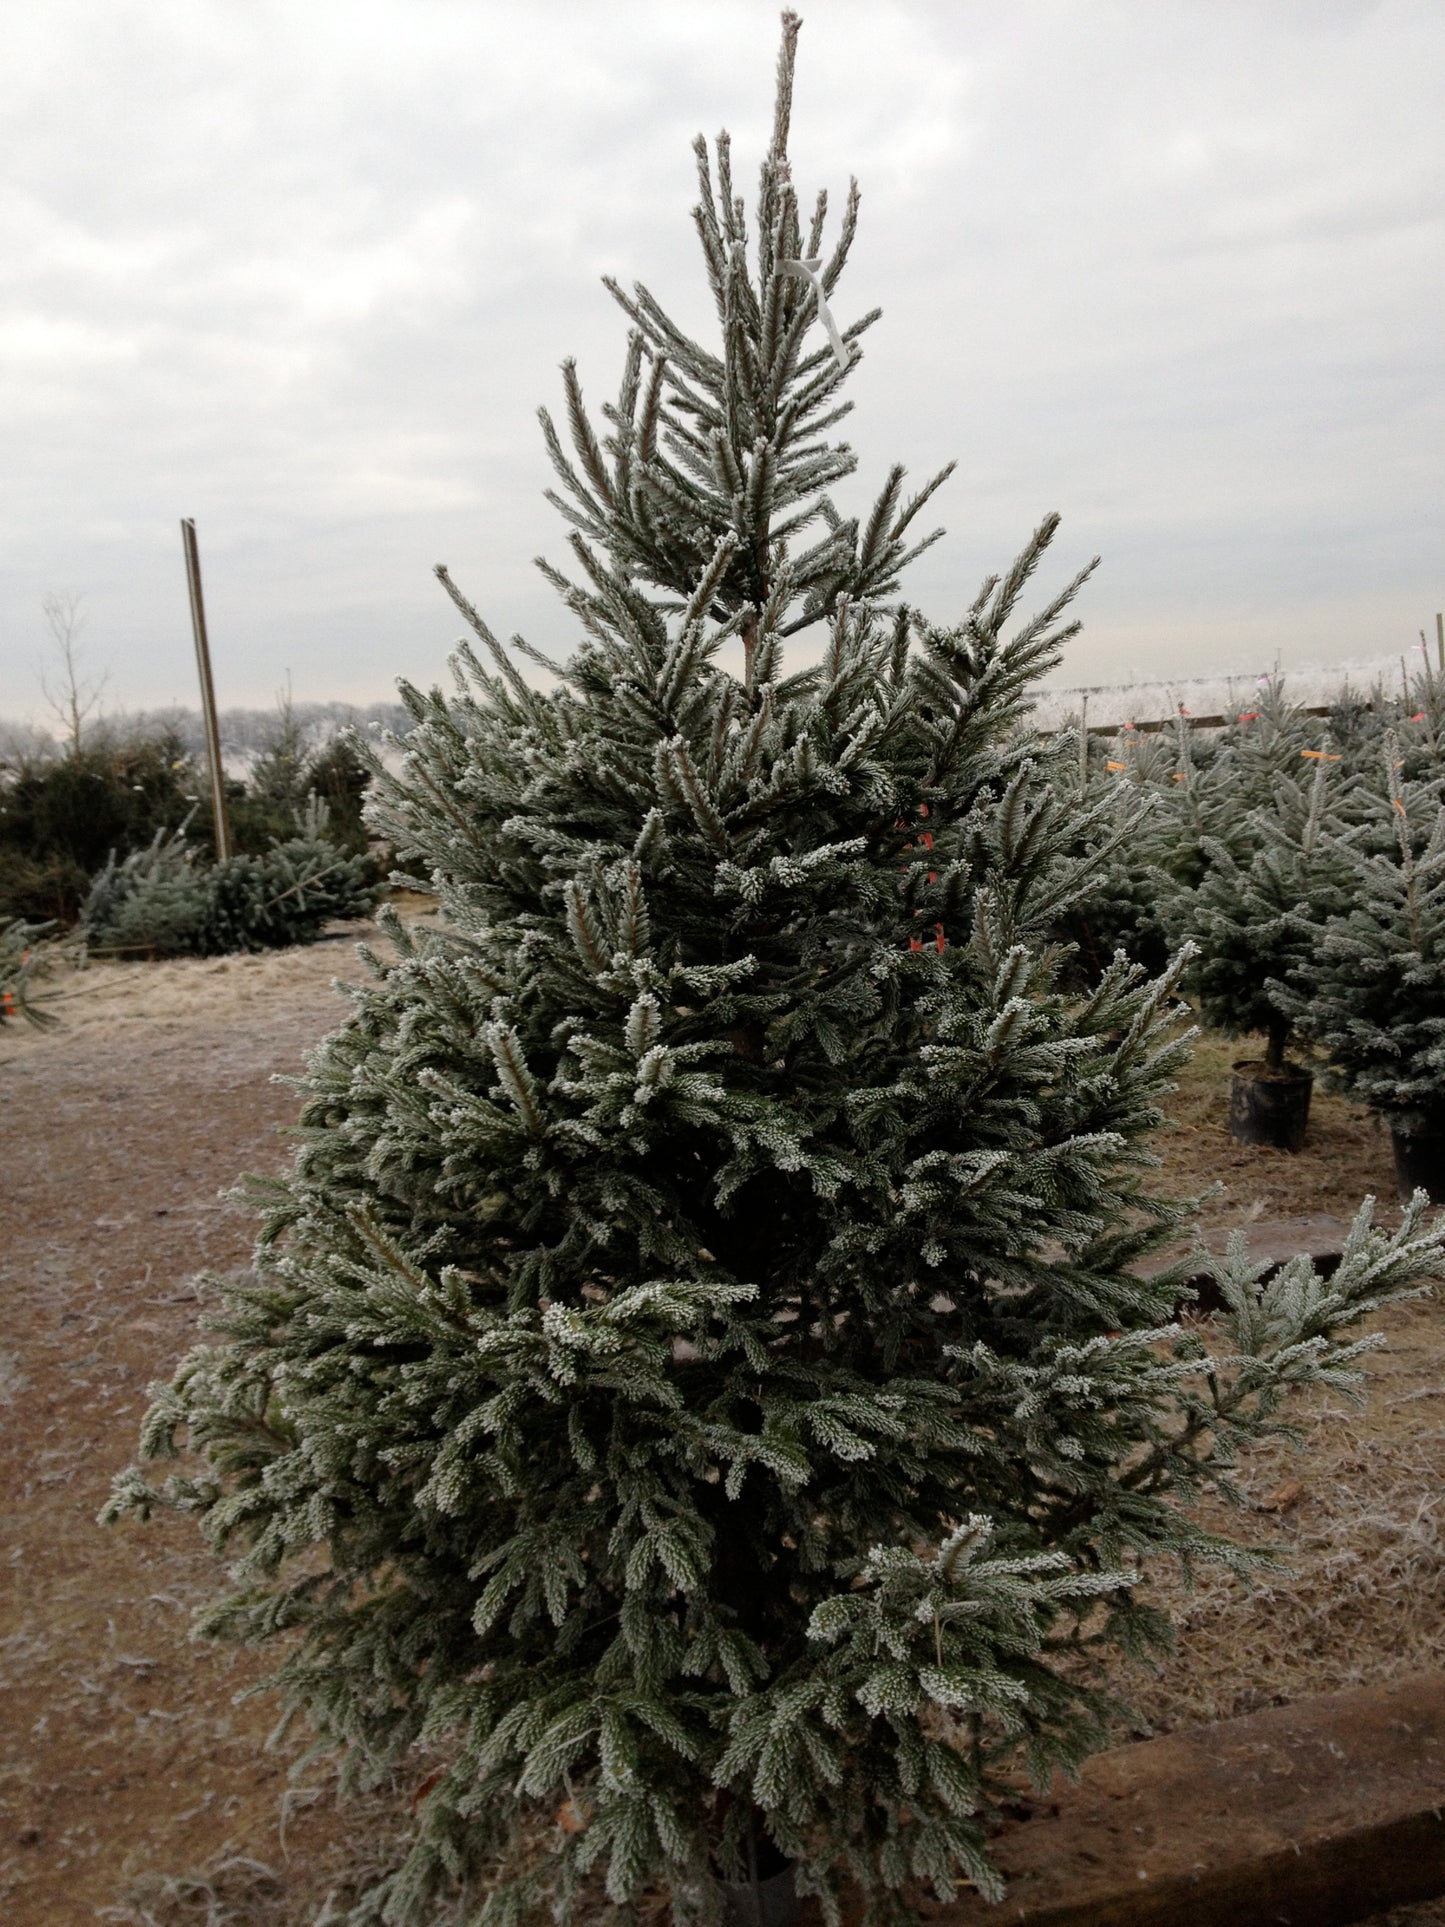 Blue Spruce Christmas trees are bushy trees with a strong festive pine aroma. Trees are varying shades of icy white-green to blue. We have 5 sizes available ranging from 4-8ft.